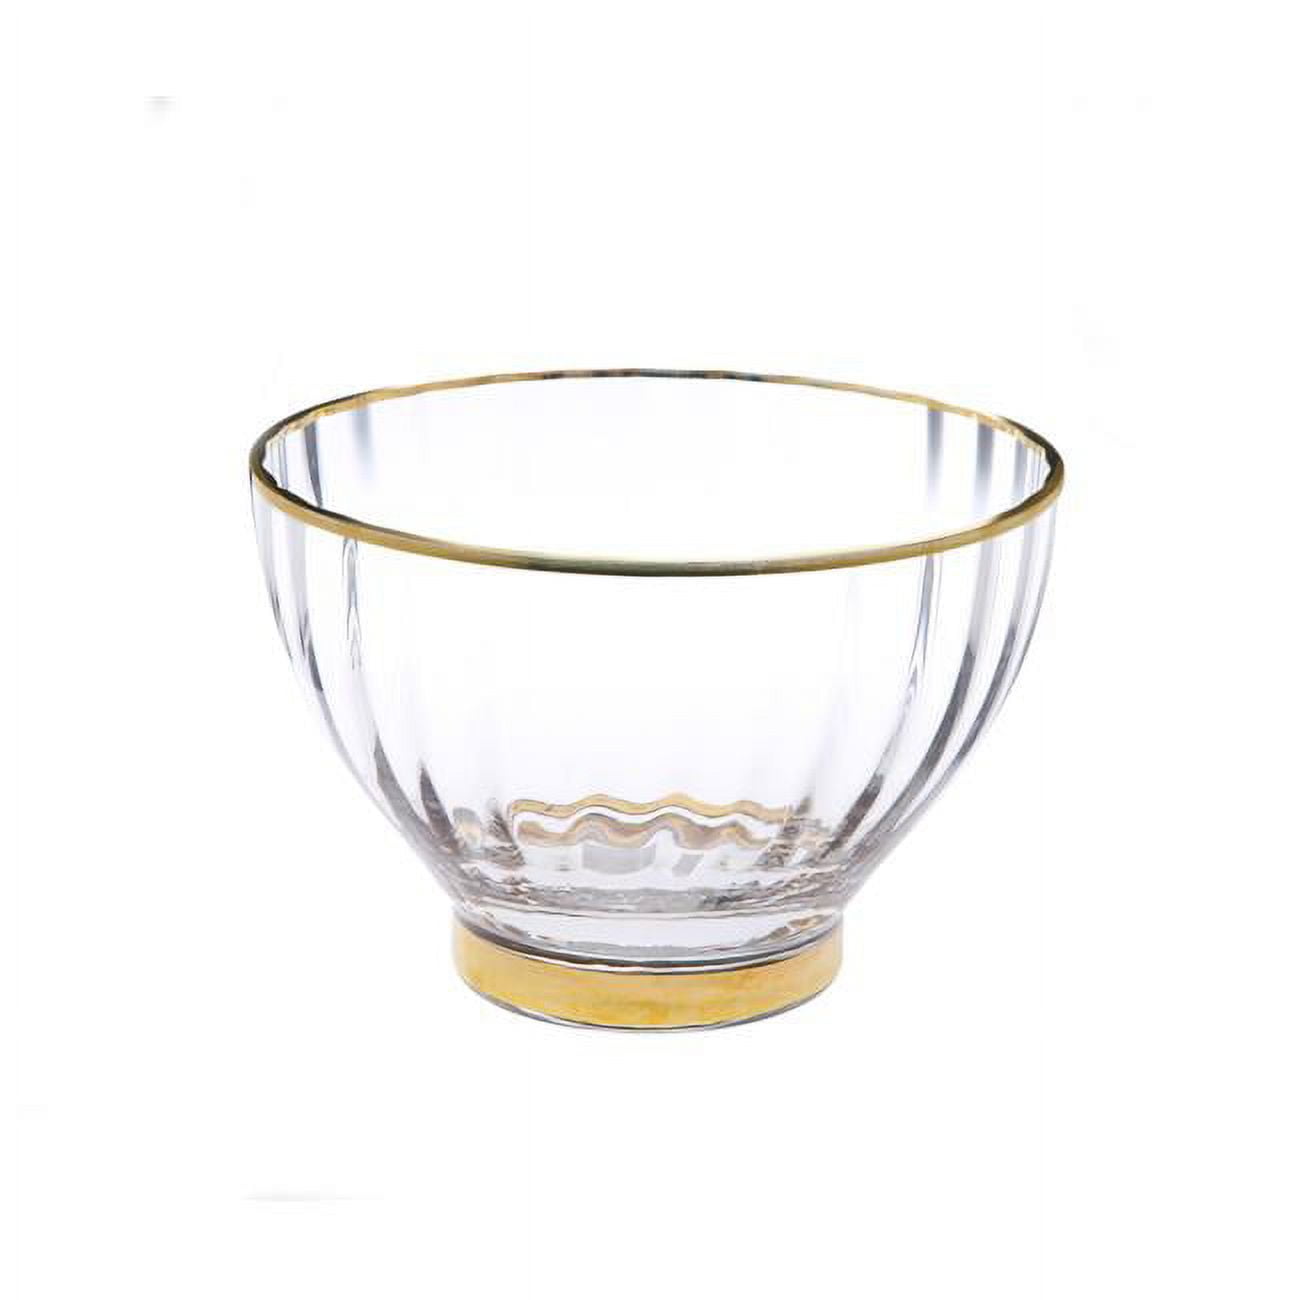 Classic Touch Db1045 Line Textured Dessert Bowls With Gold Rim & Base, Set Of 4